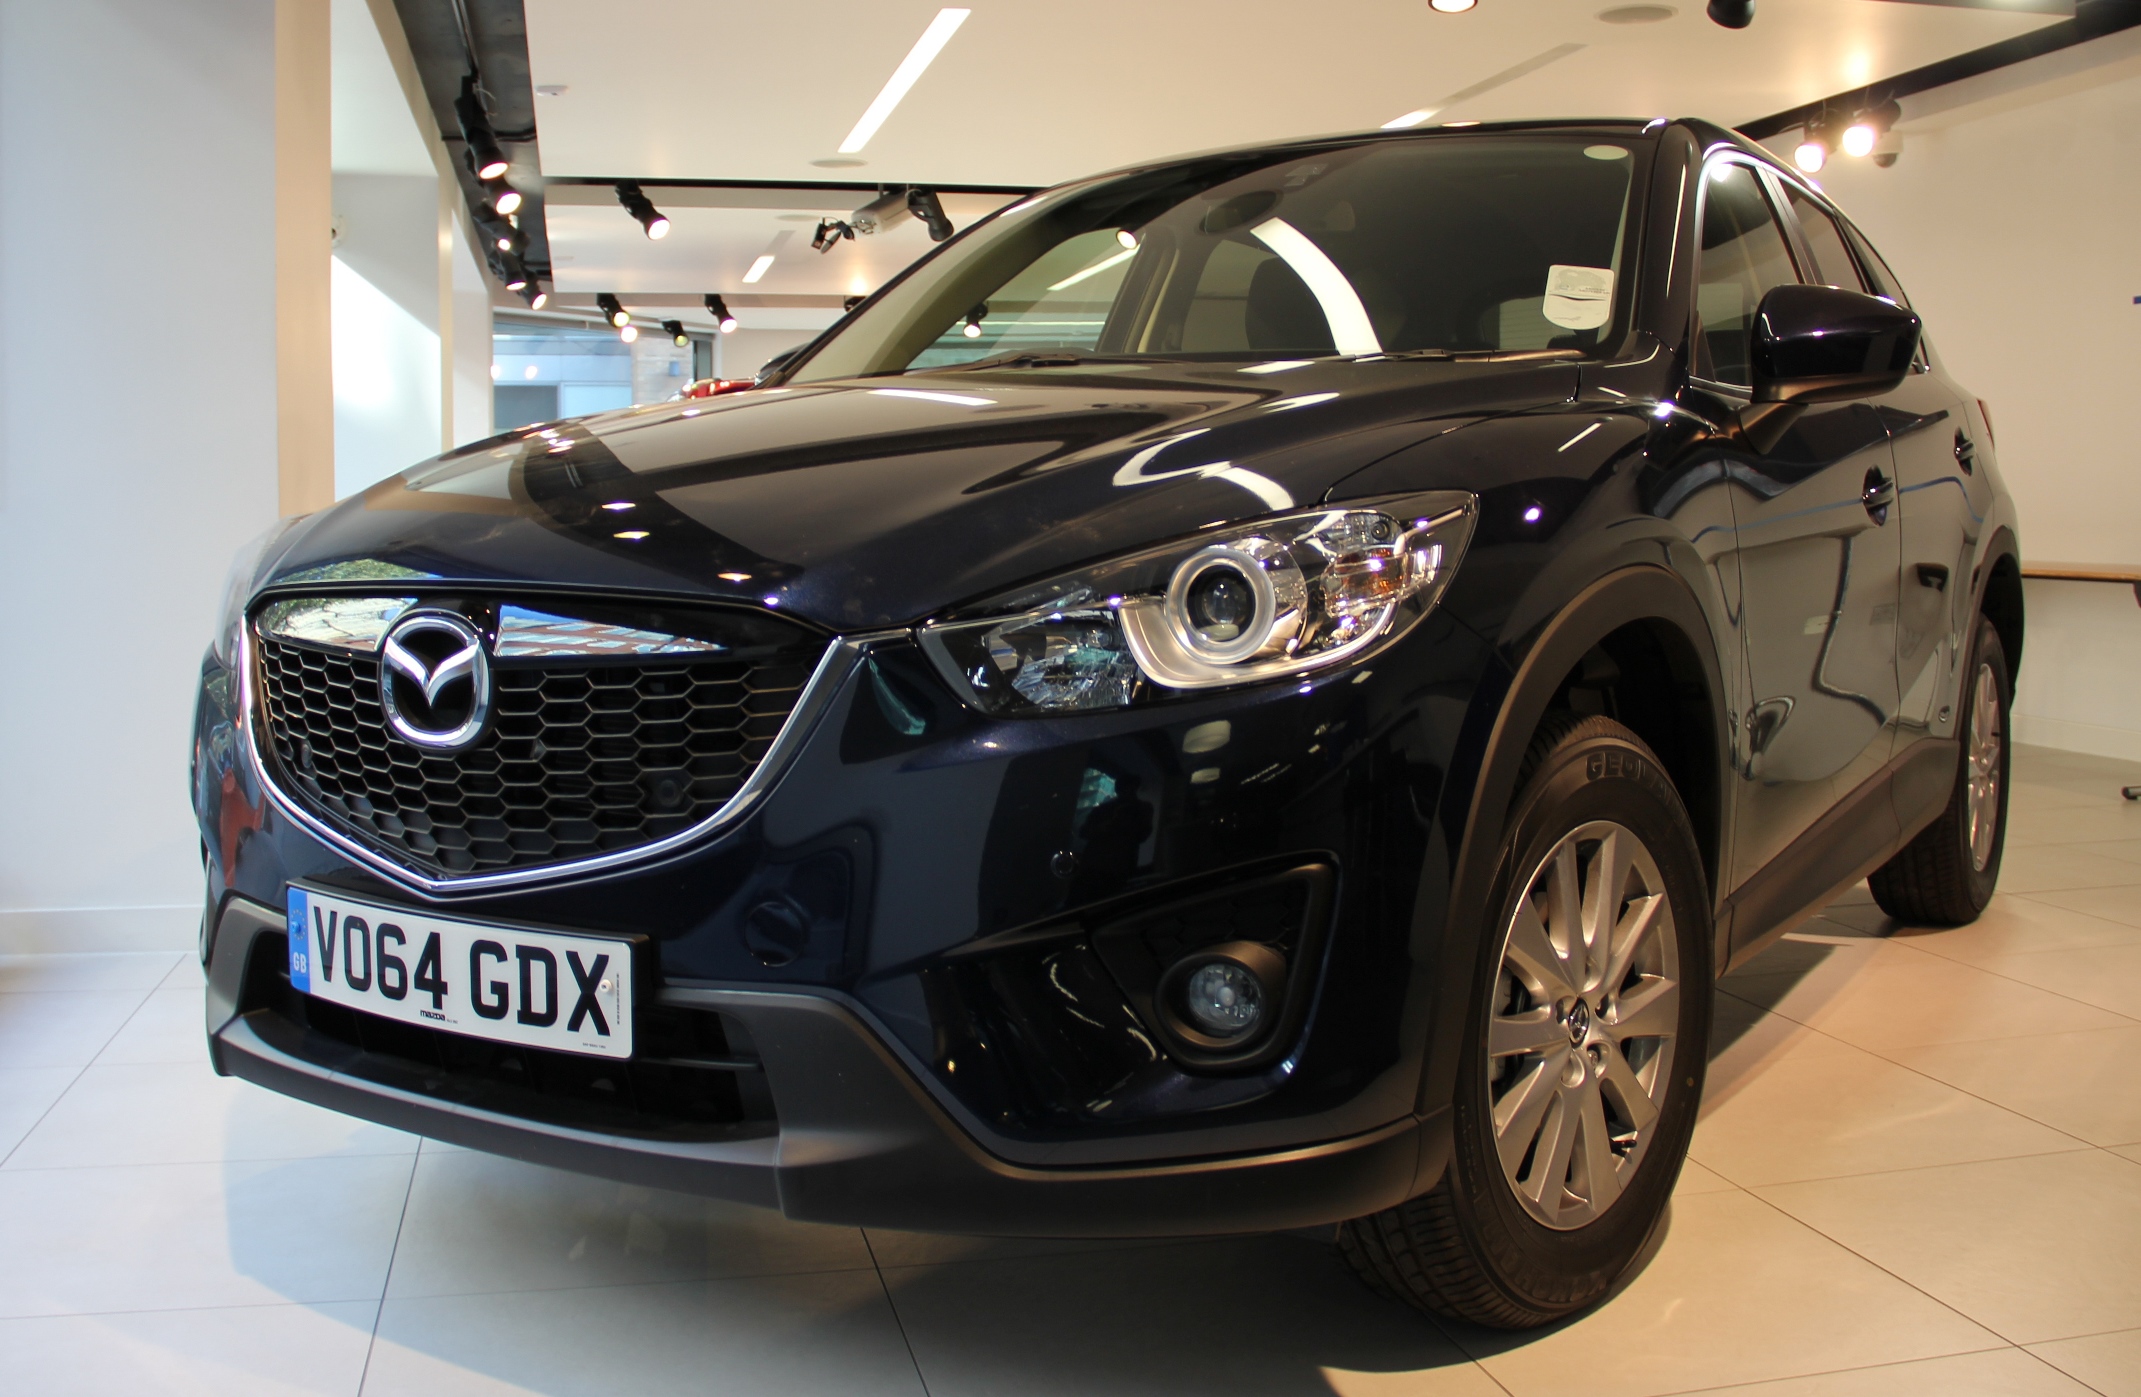 Mazda CX-5 one of a recent breed of crossovers